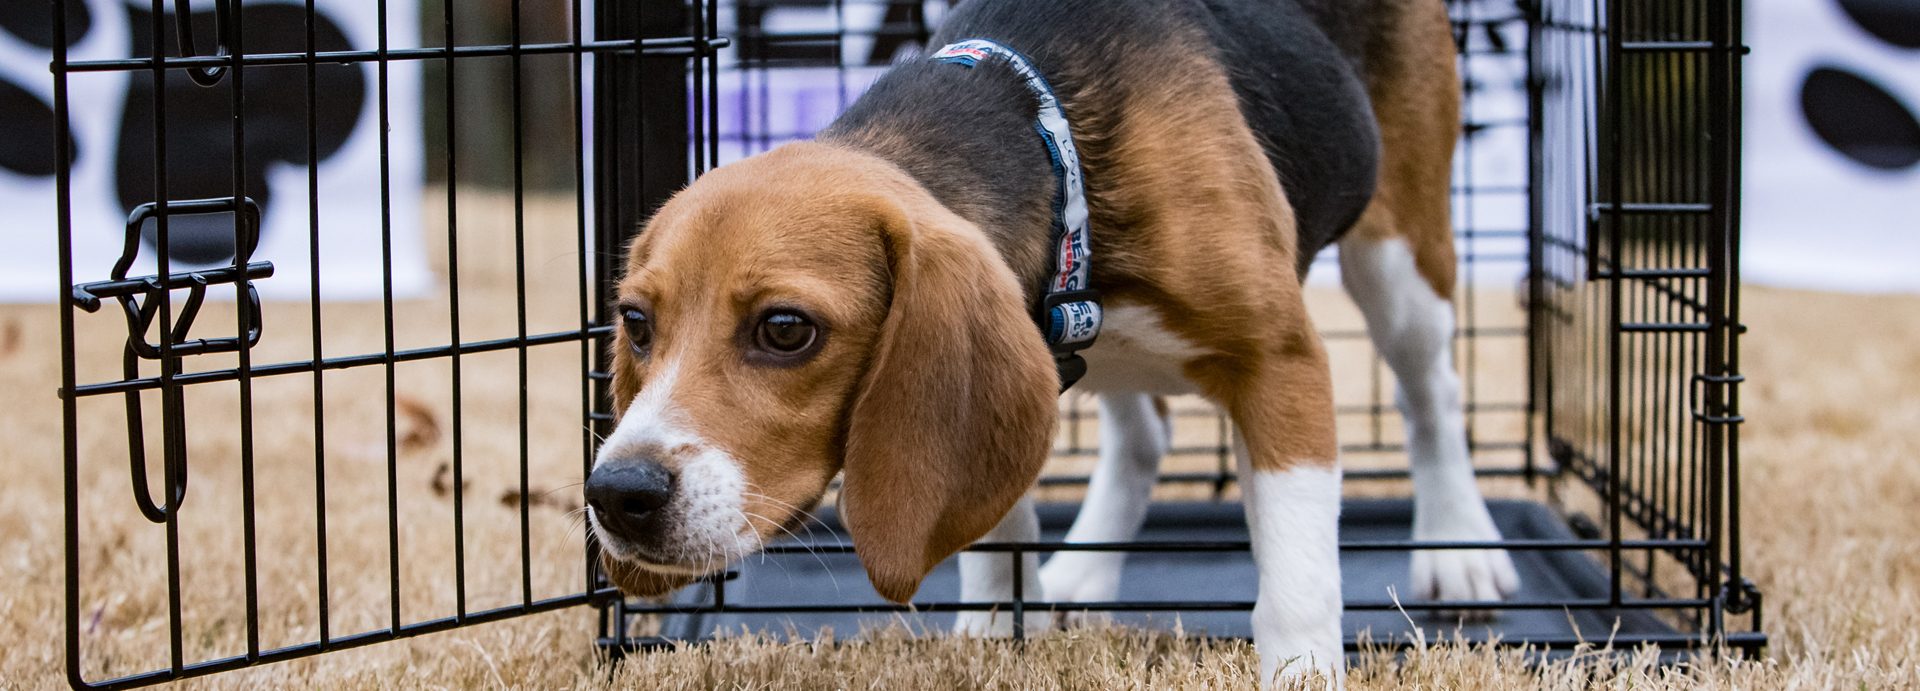 University of Missouri Researchers Blinded Puppies Before Euthanization